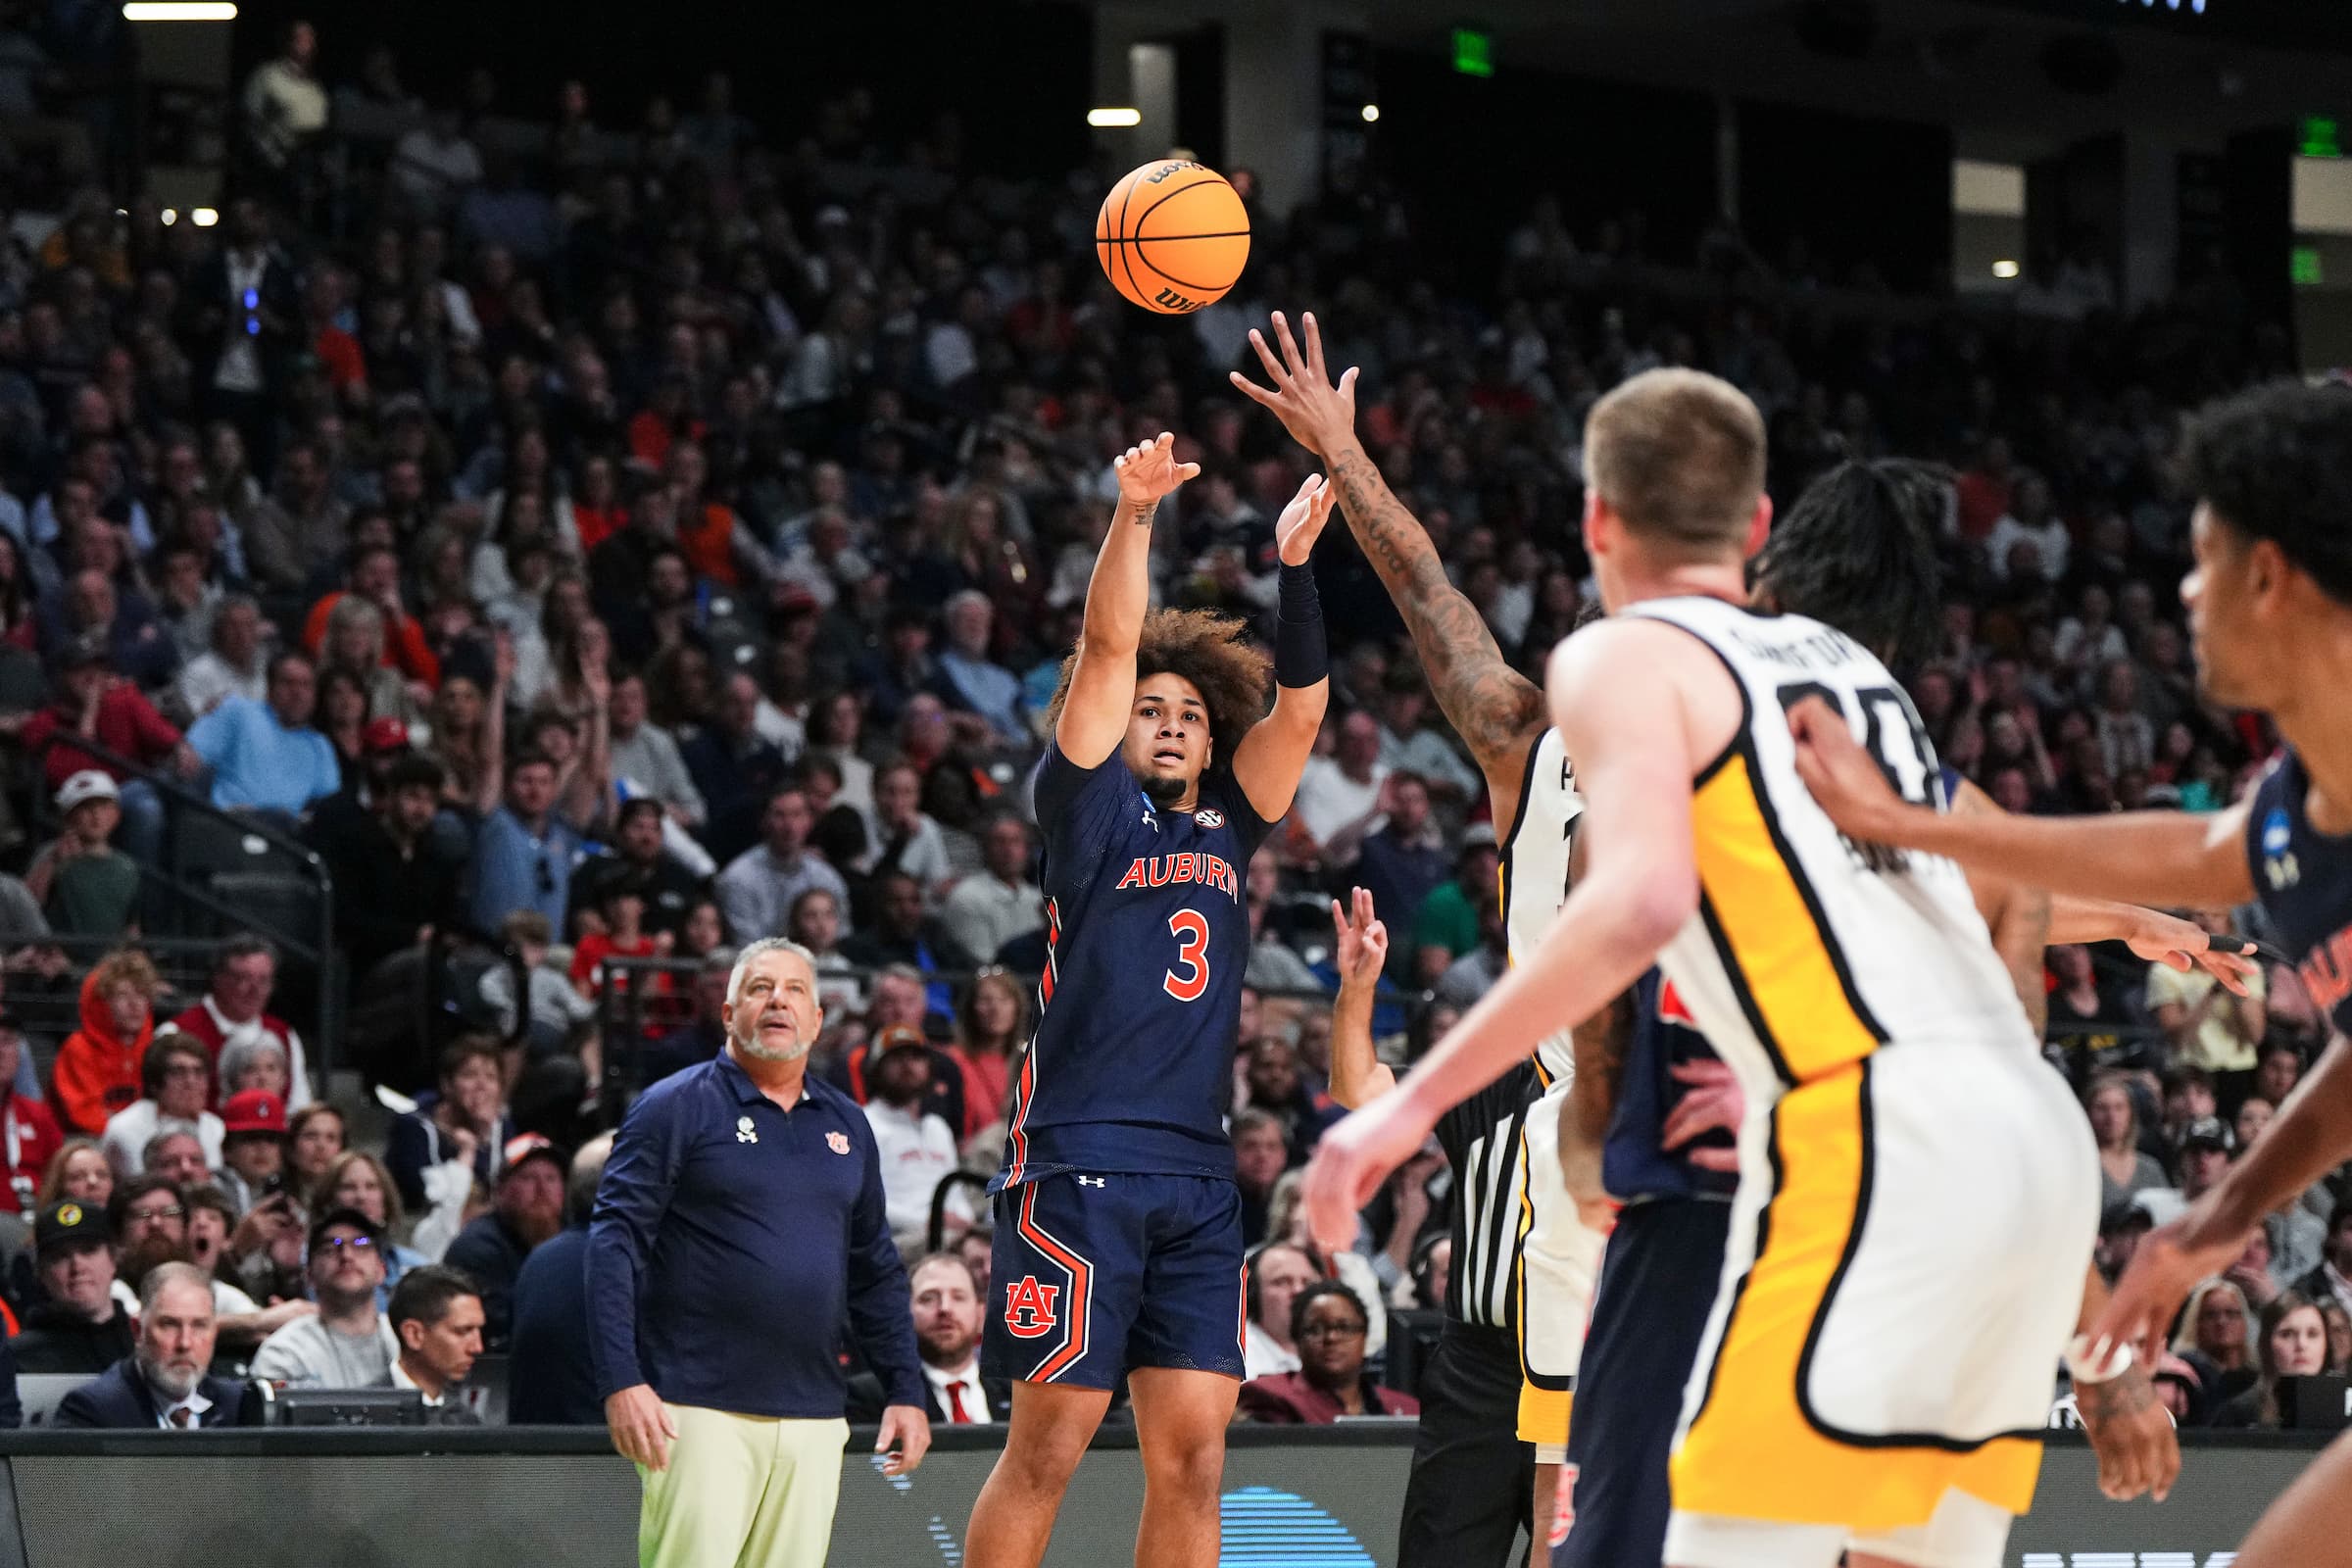 Tre Donaldson (3) during the game between the Iowa Hawkeyes and the Auburn Tigers at Legacy Arena in Birmingham, AL on Thursday, Mar 16, 2023. Zach Bland/Auburn Tigers